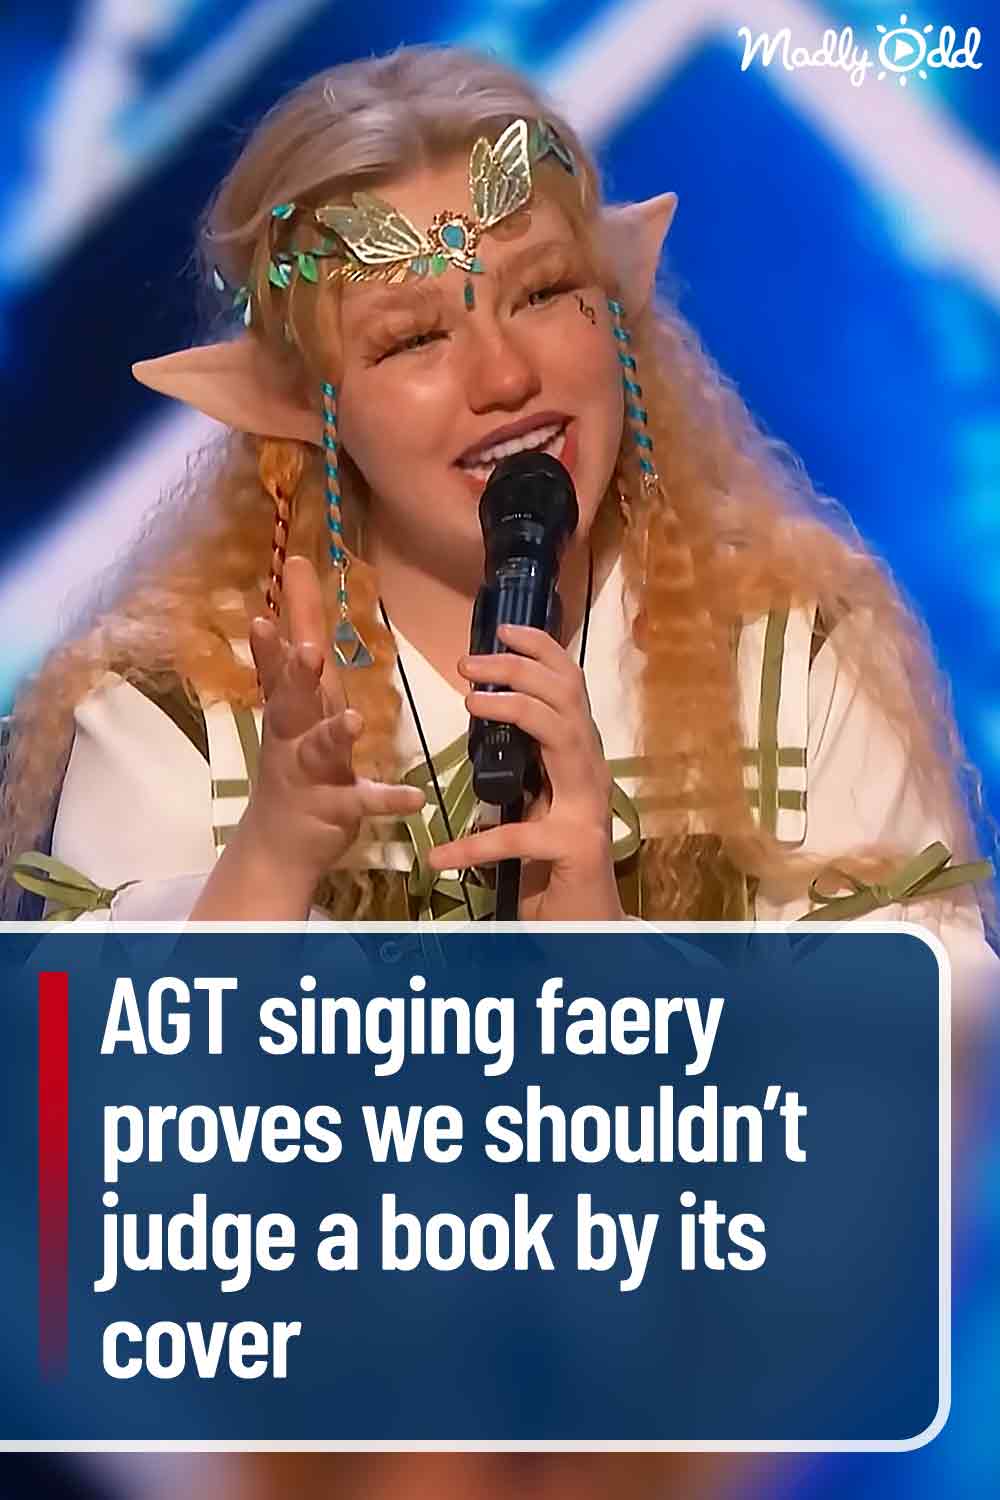 AGT singing faery proves we shouldn’t judge a book by its cover